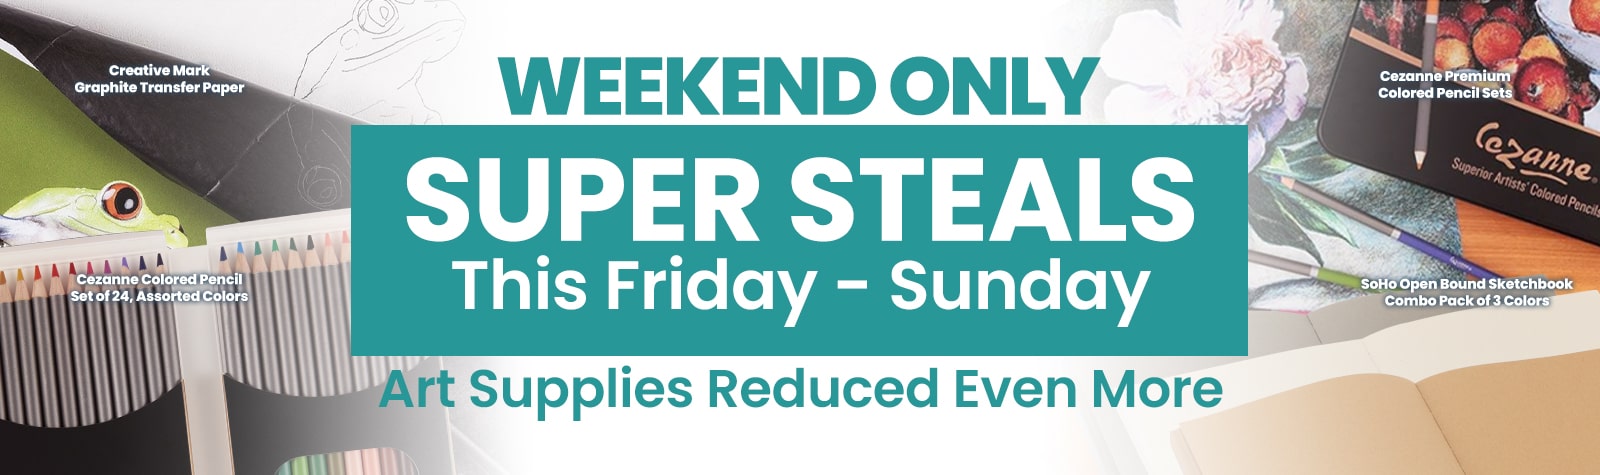  3 Days Only Super Steals - Supplies Reduced Even More!